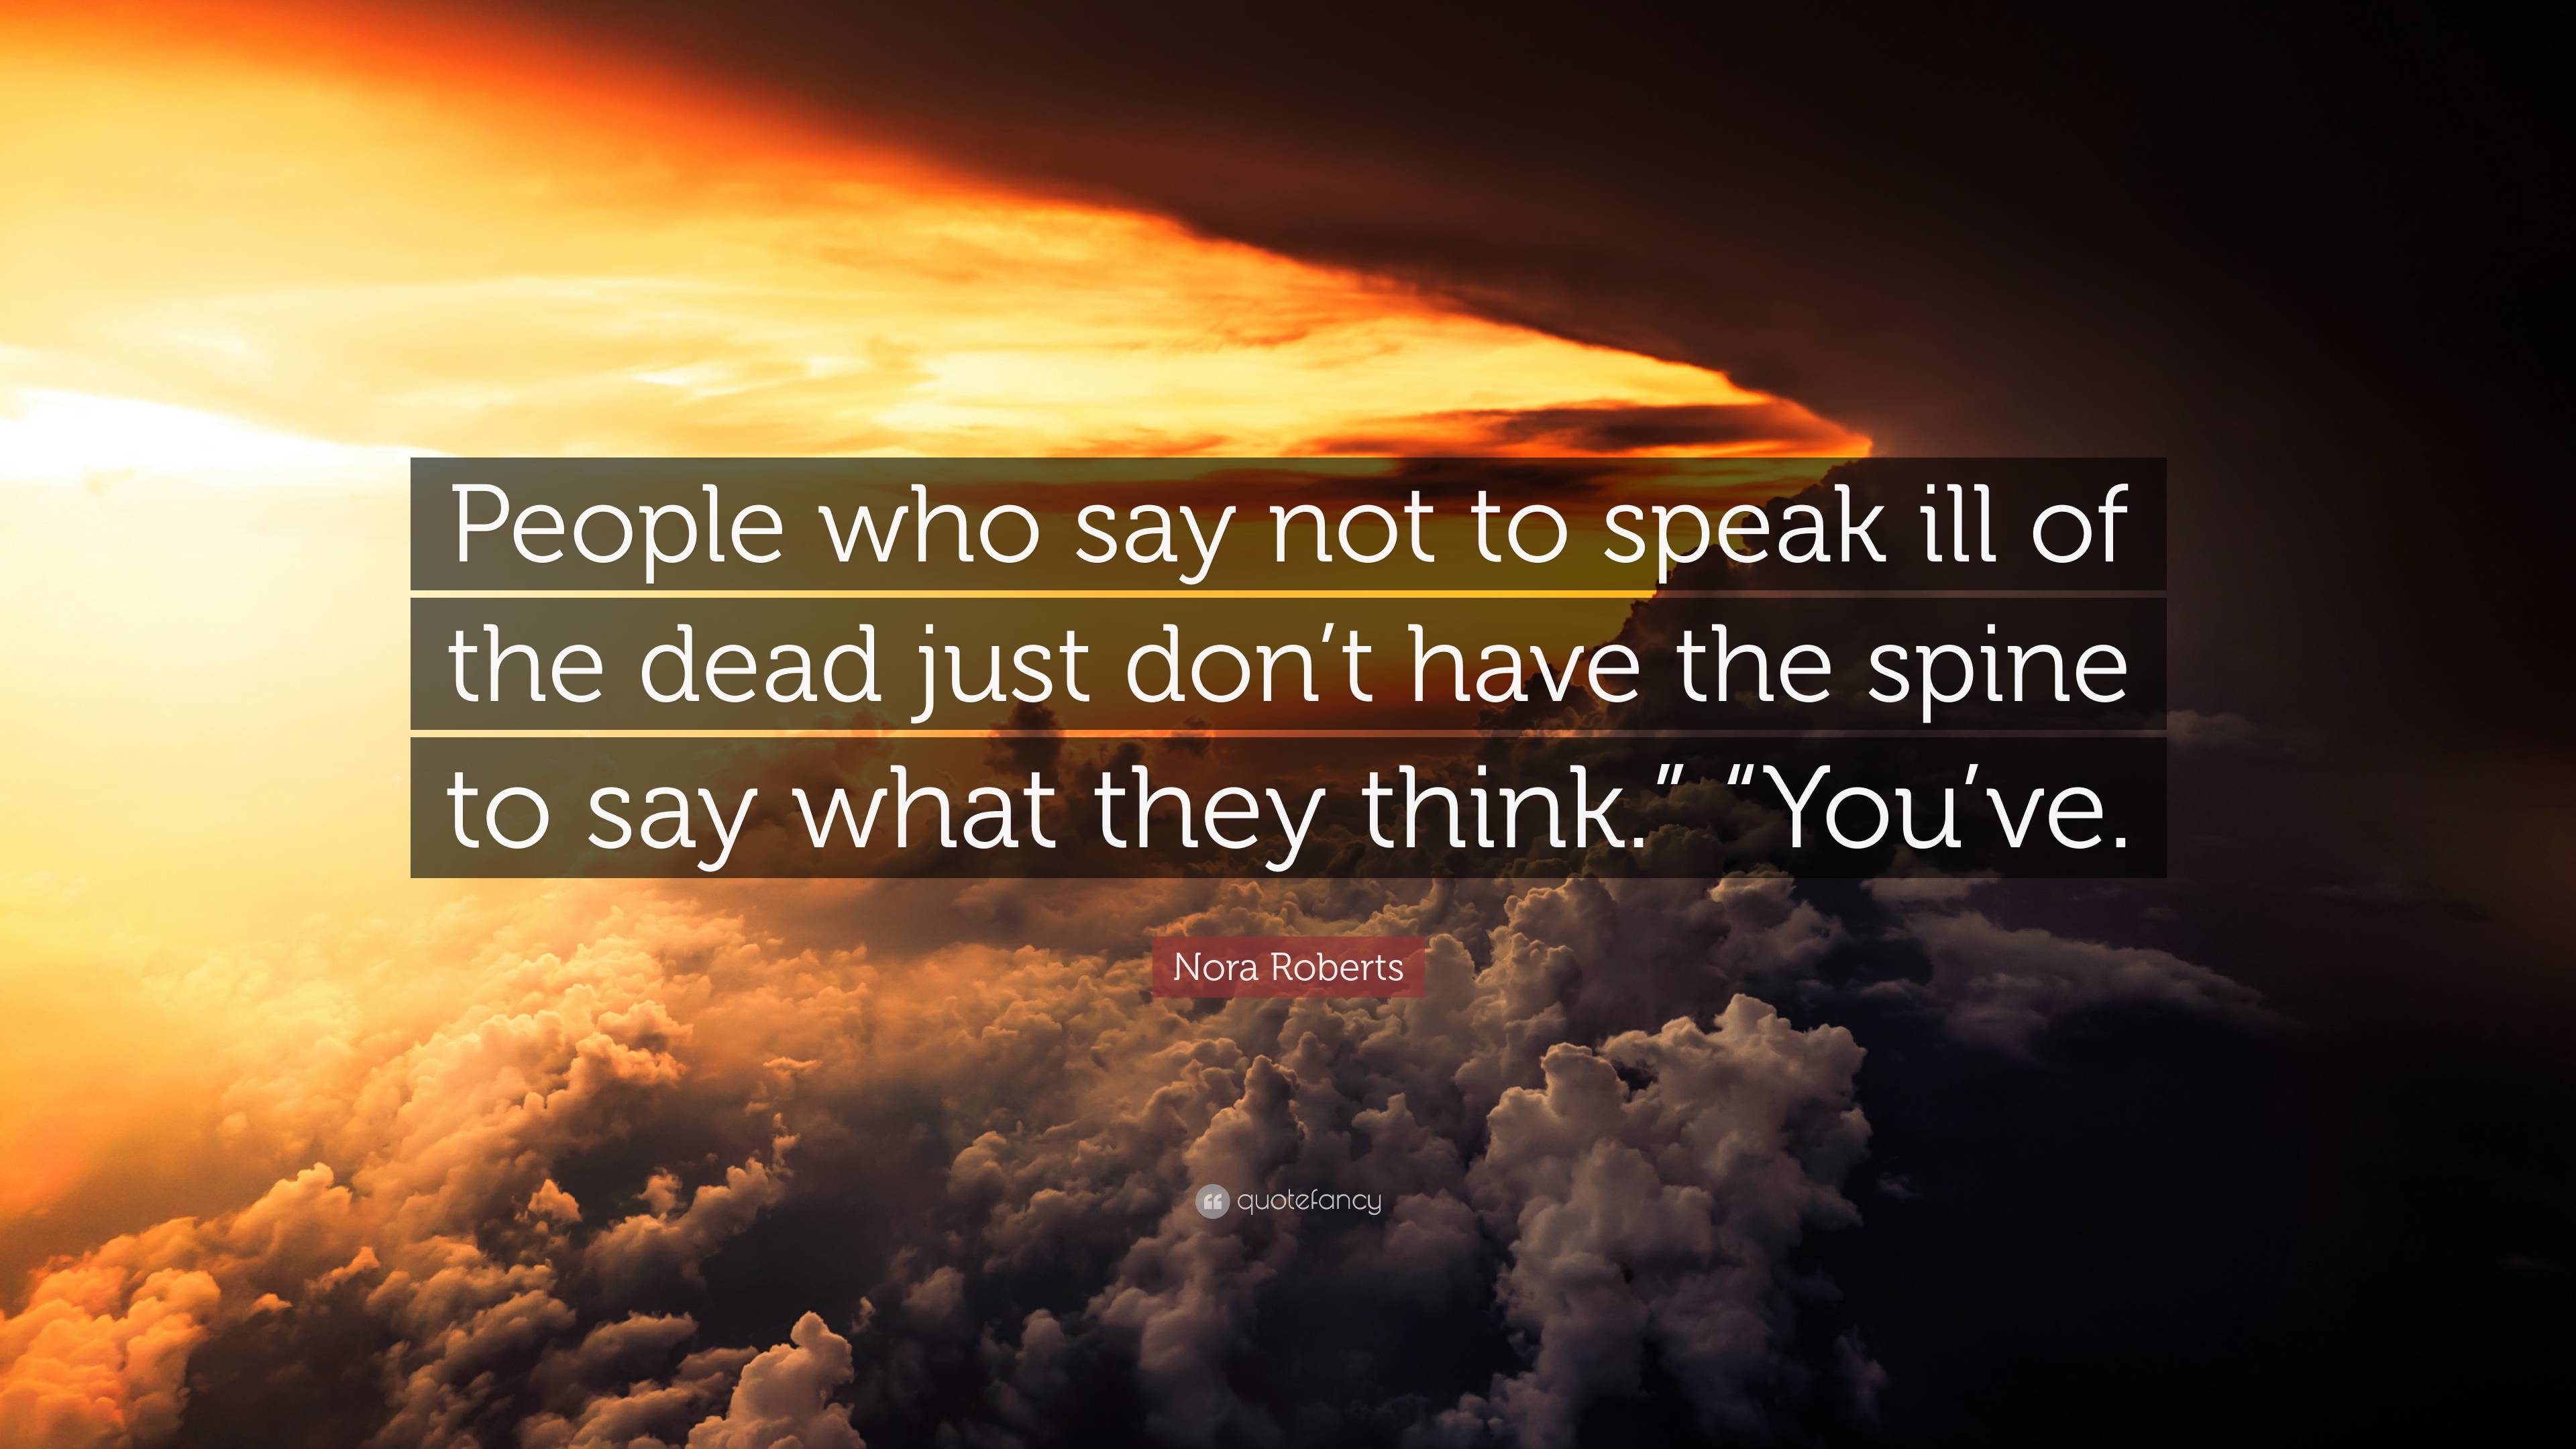 Nora Roberts Quote: “People who say not to speak ill of the dead just ...